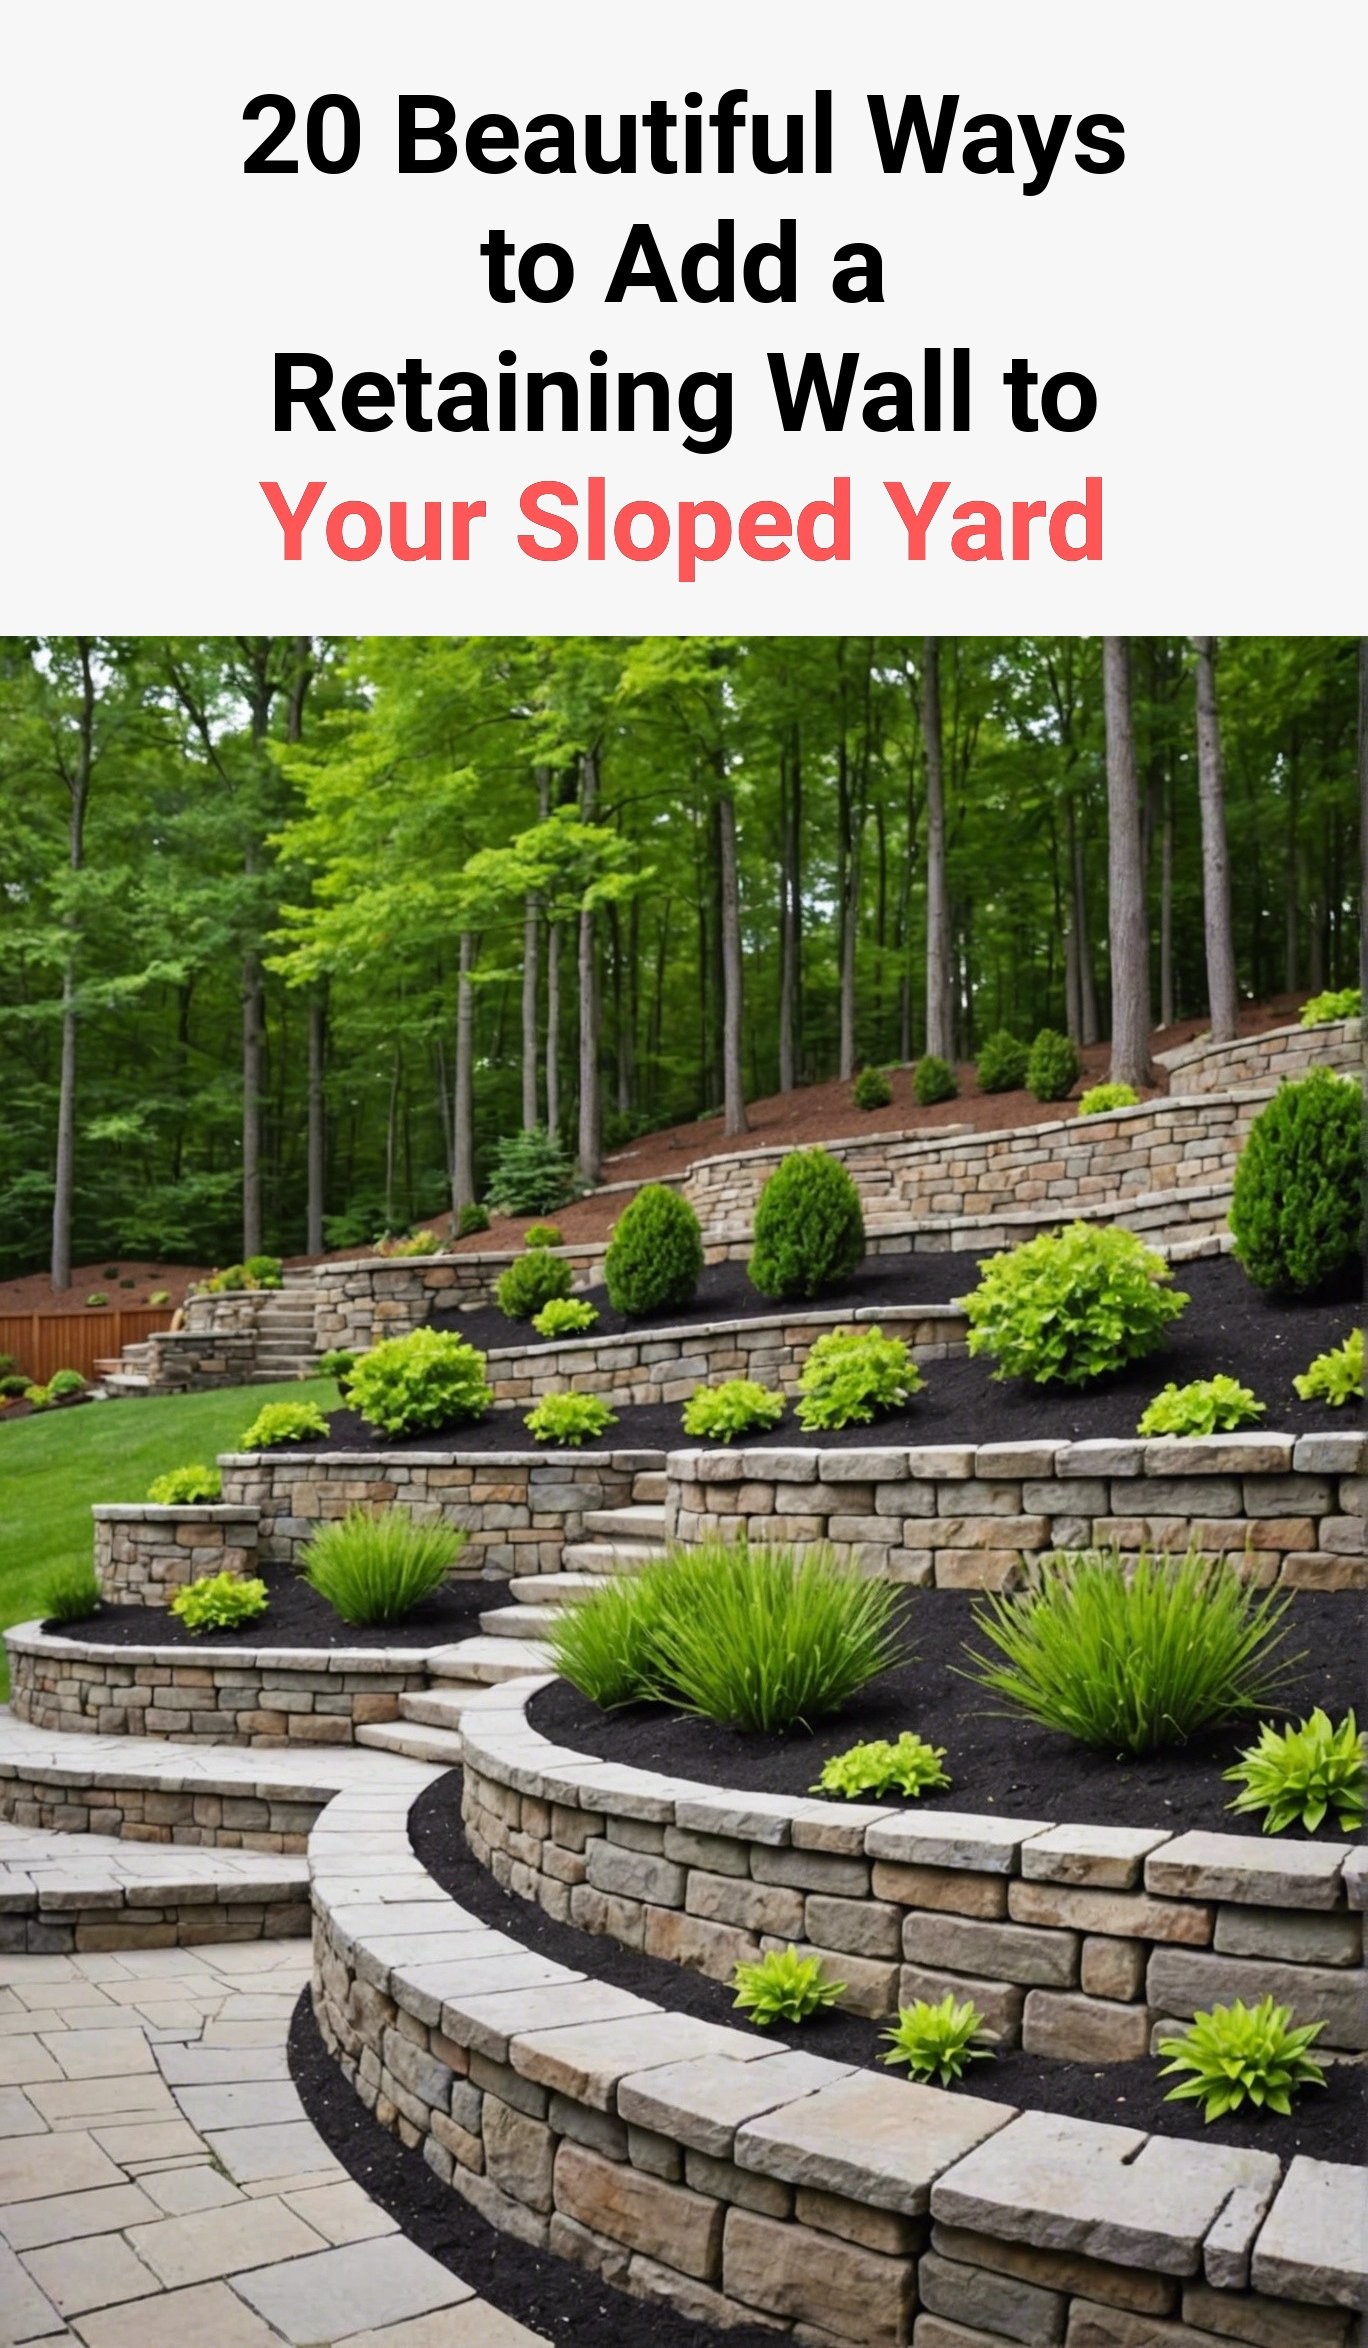 20 Beautiful Ways to Add a Retaining Wall to Your Sloped Yard